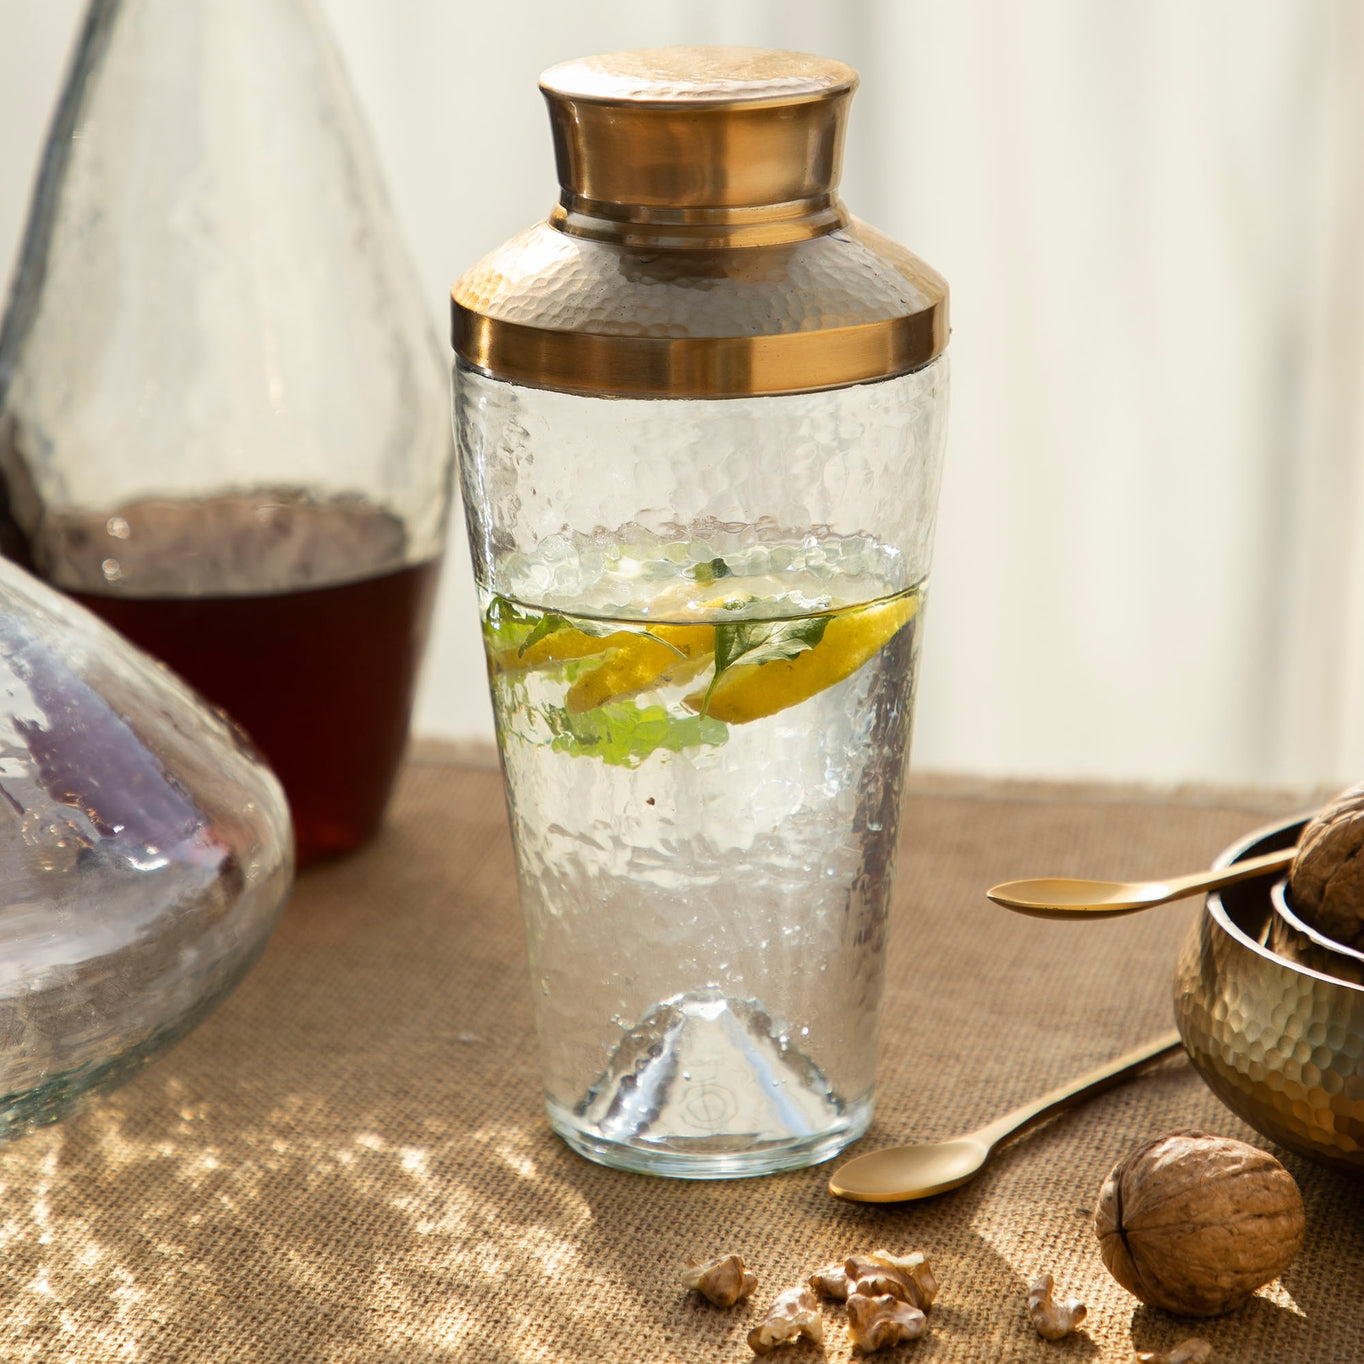 Elevate your mixology game with this stylish pebbled glass cocktail shaker, featuring a hammered, brass-like stainless steel lid crowning a lightly dimpled glass body. 